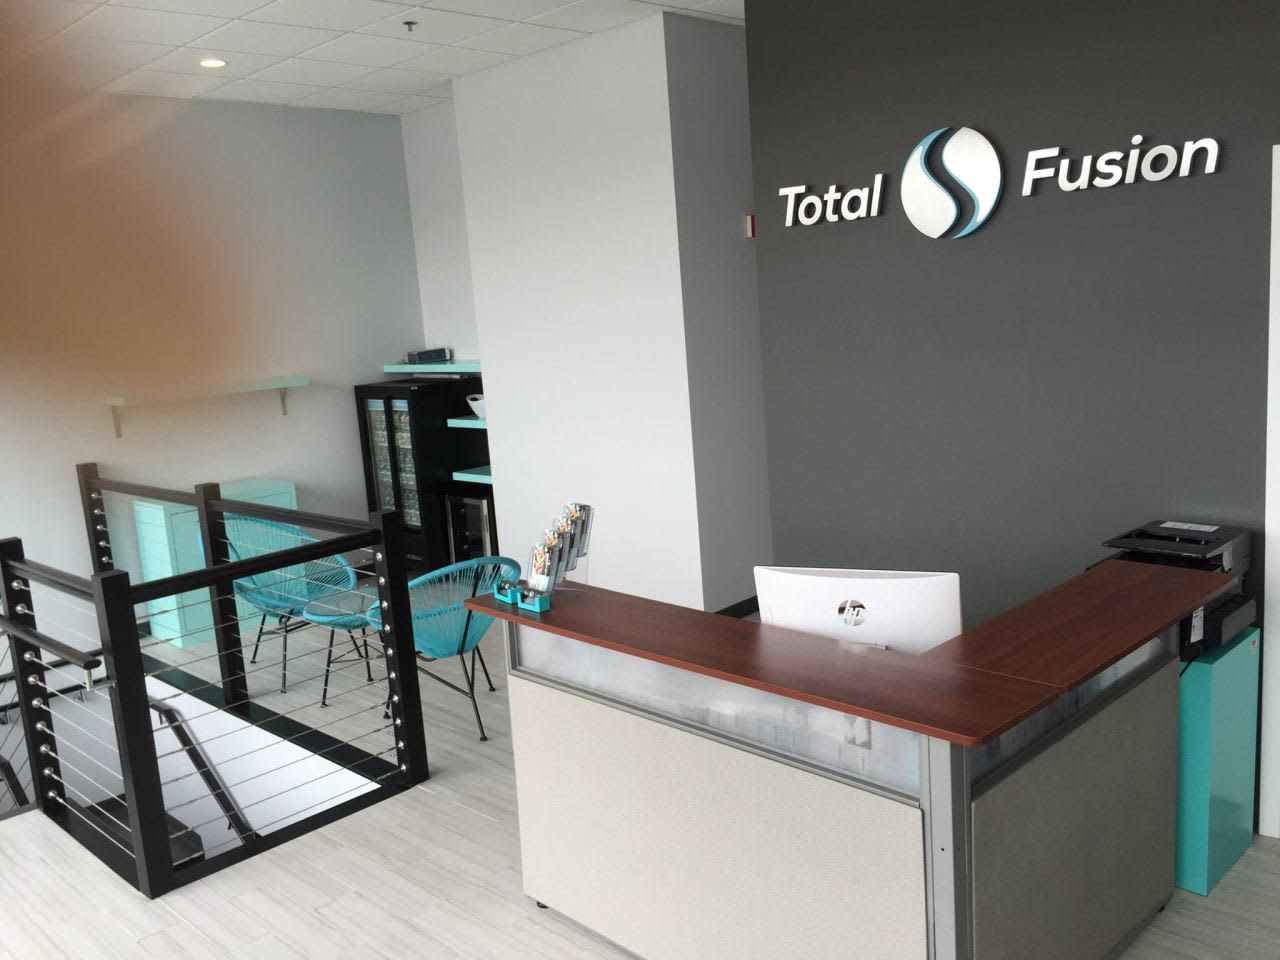 Total Fusion in Harrison is offering free pop-up classes this week.